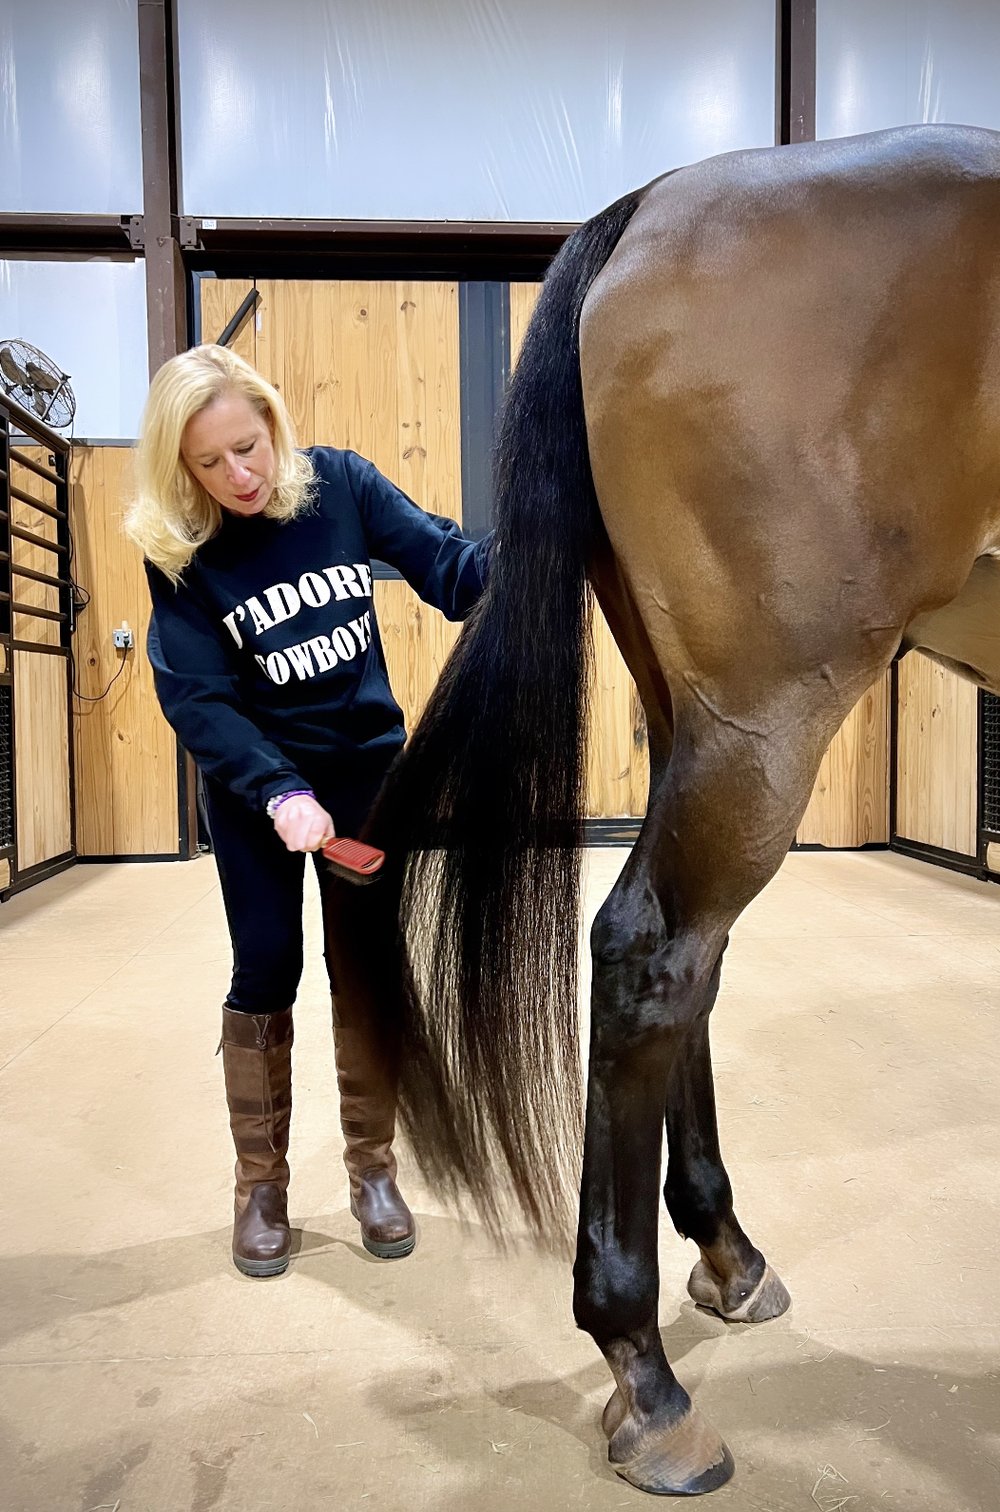 Big Tails - How Virtually Any Horse Can Have a Naturally Full Tail